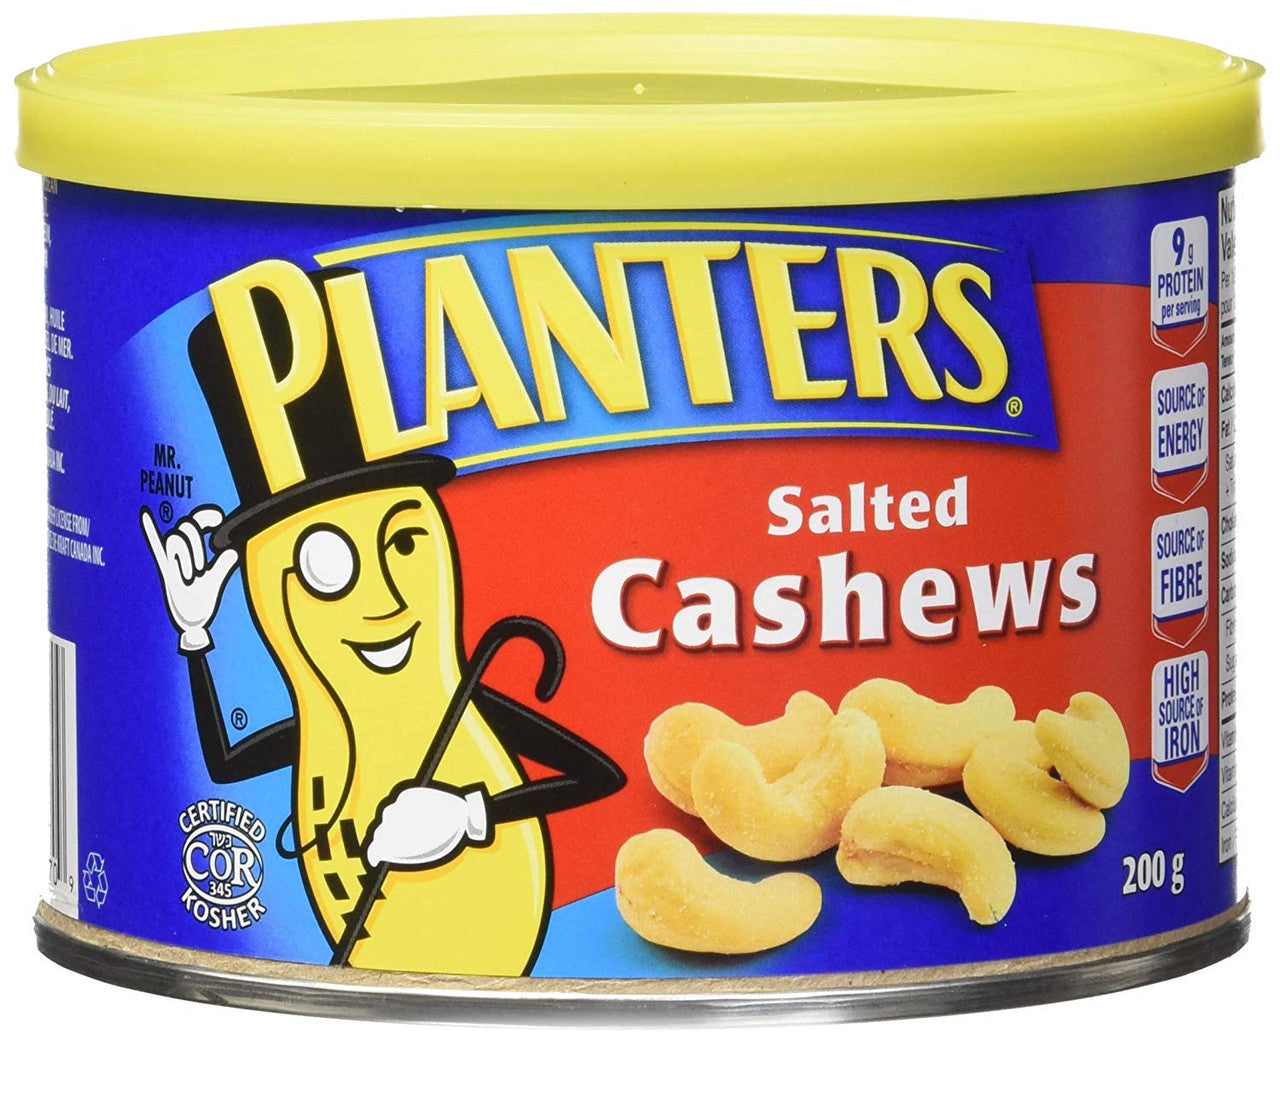 Planters Salted Cashews, 200g/7.1oz., 12 pack, {Imported from Canada}